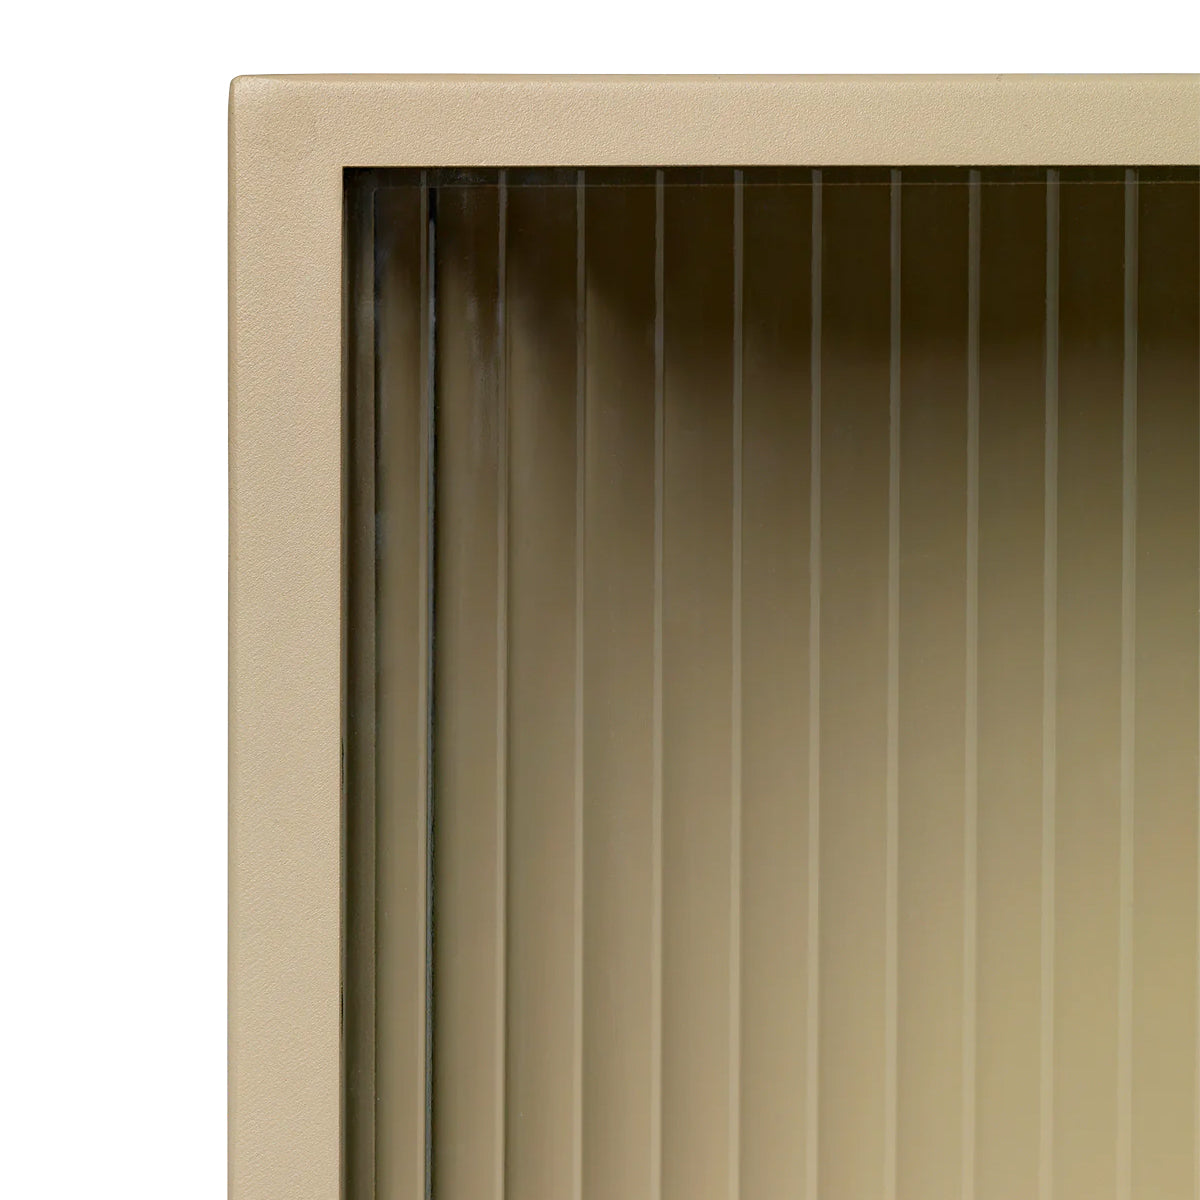 Haze Wall Cabinet With Reeded Glass - ferm LIVING